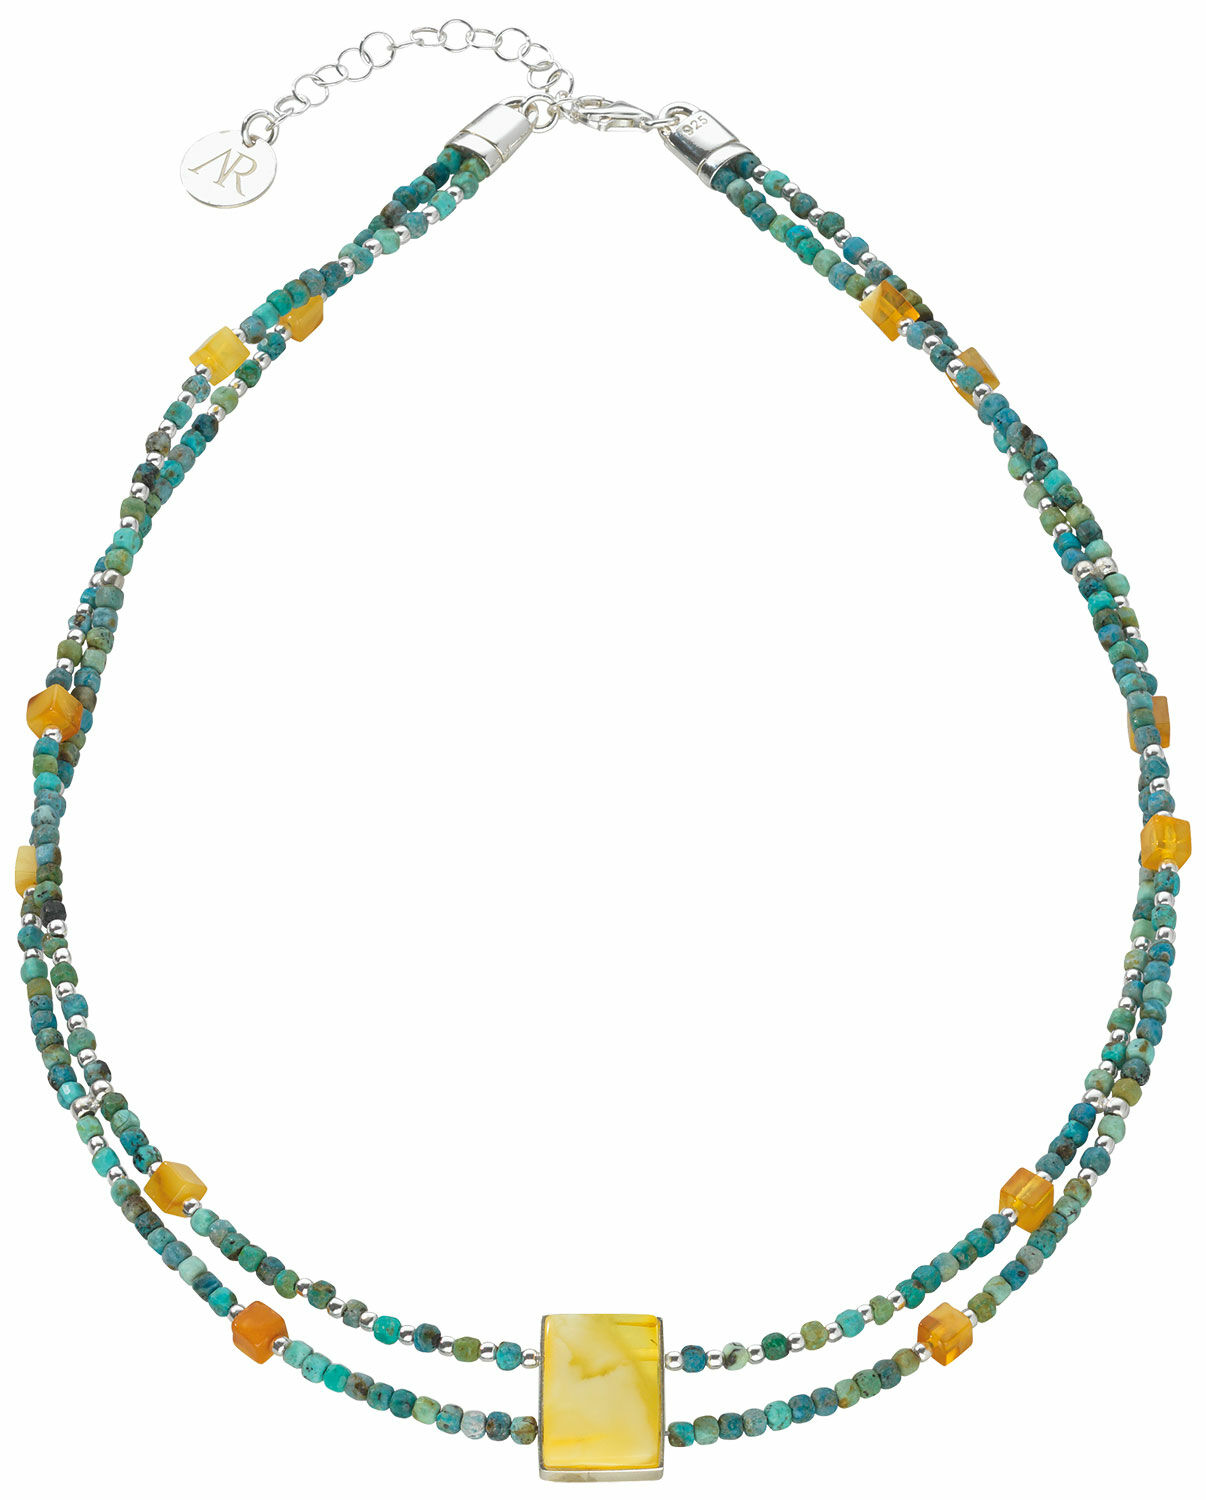 Amber necklace "Papagena"